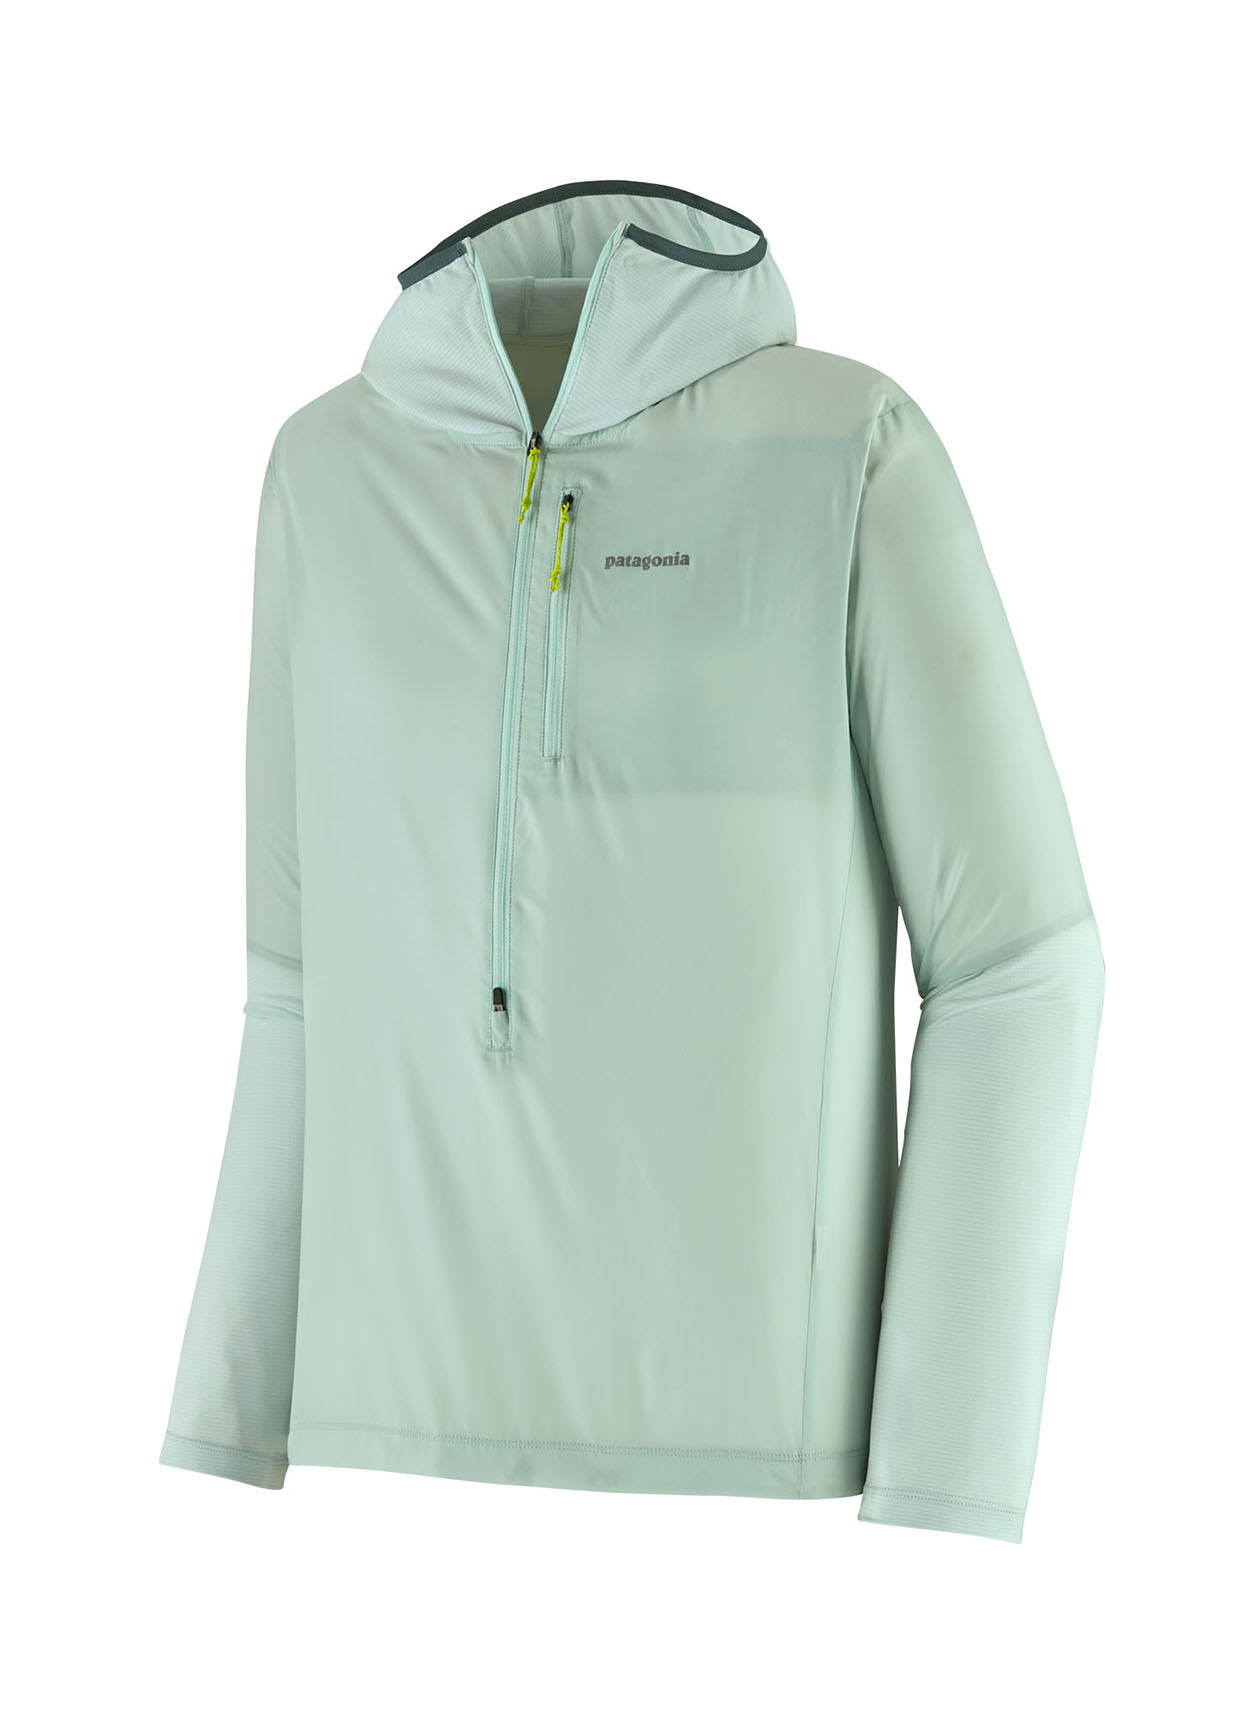 Patagonia Men's Wispy Green Airshed Pro Pullover